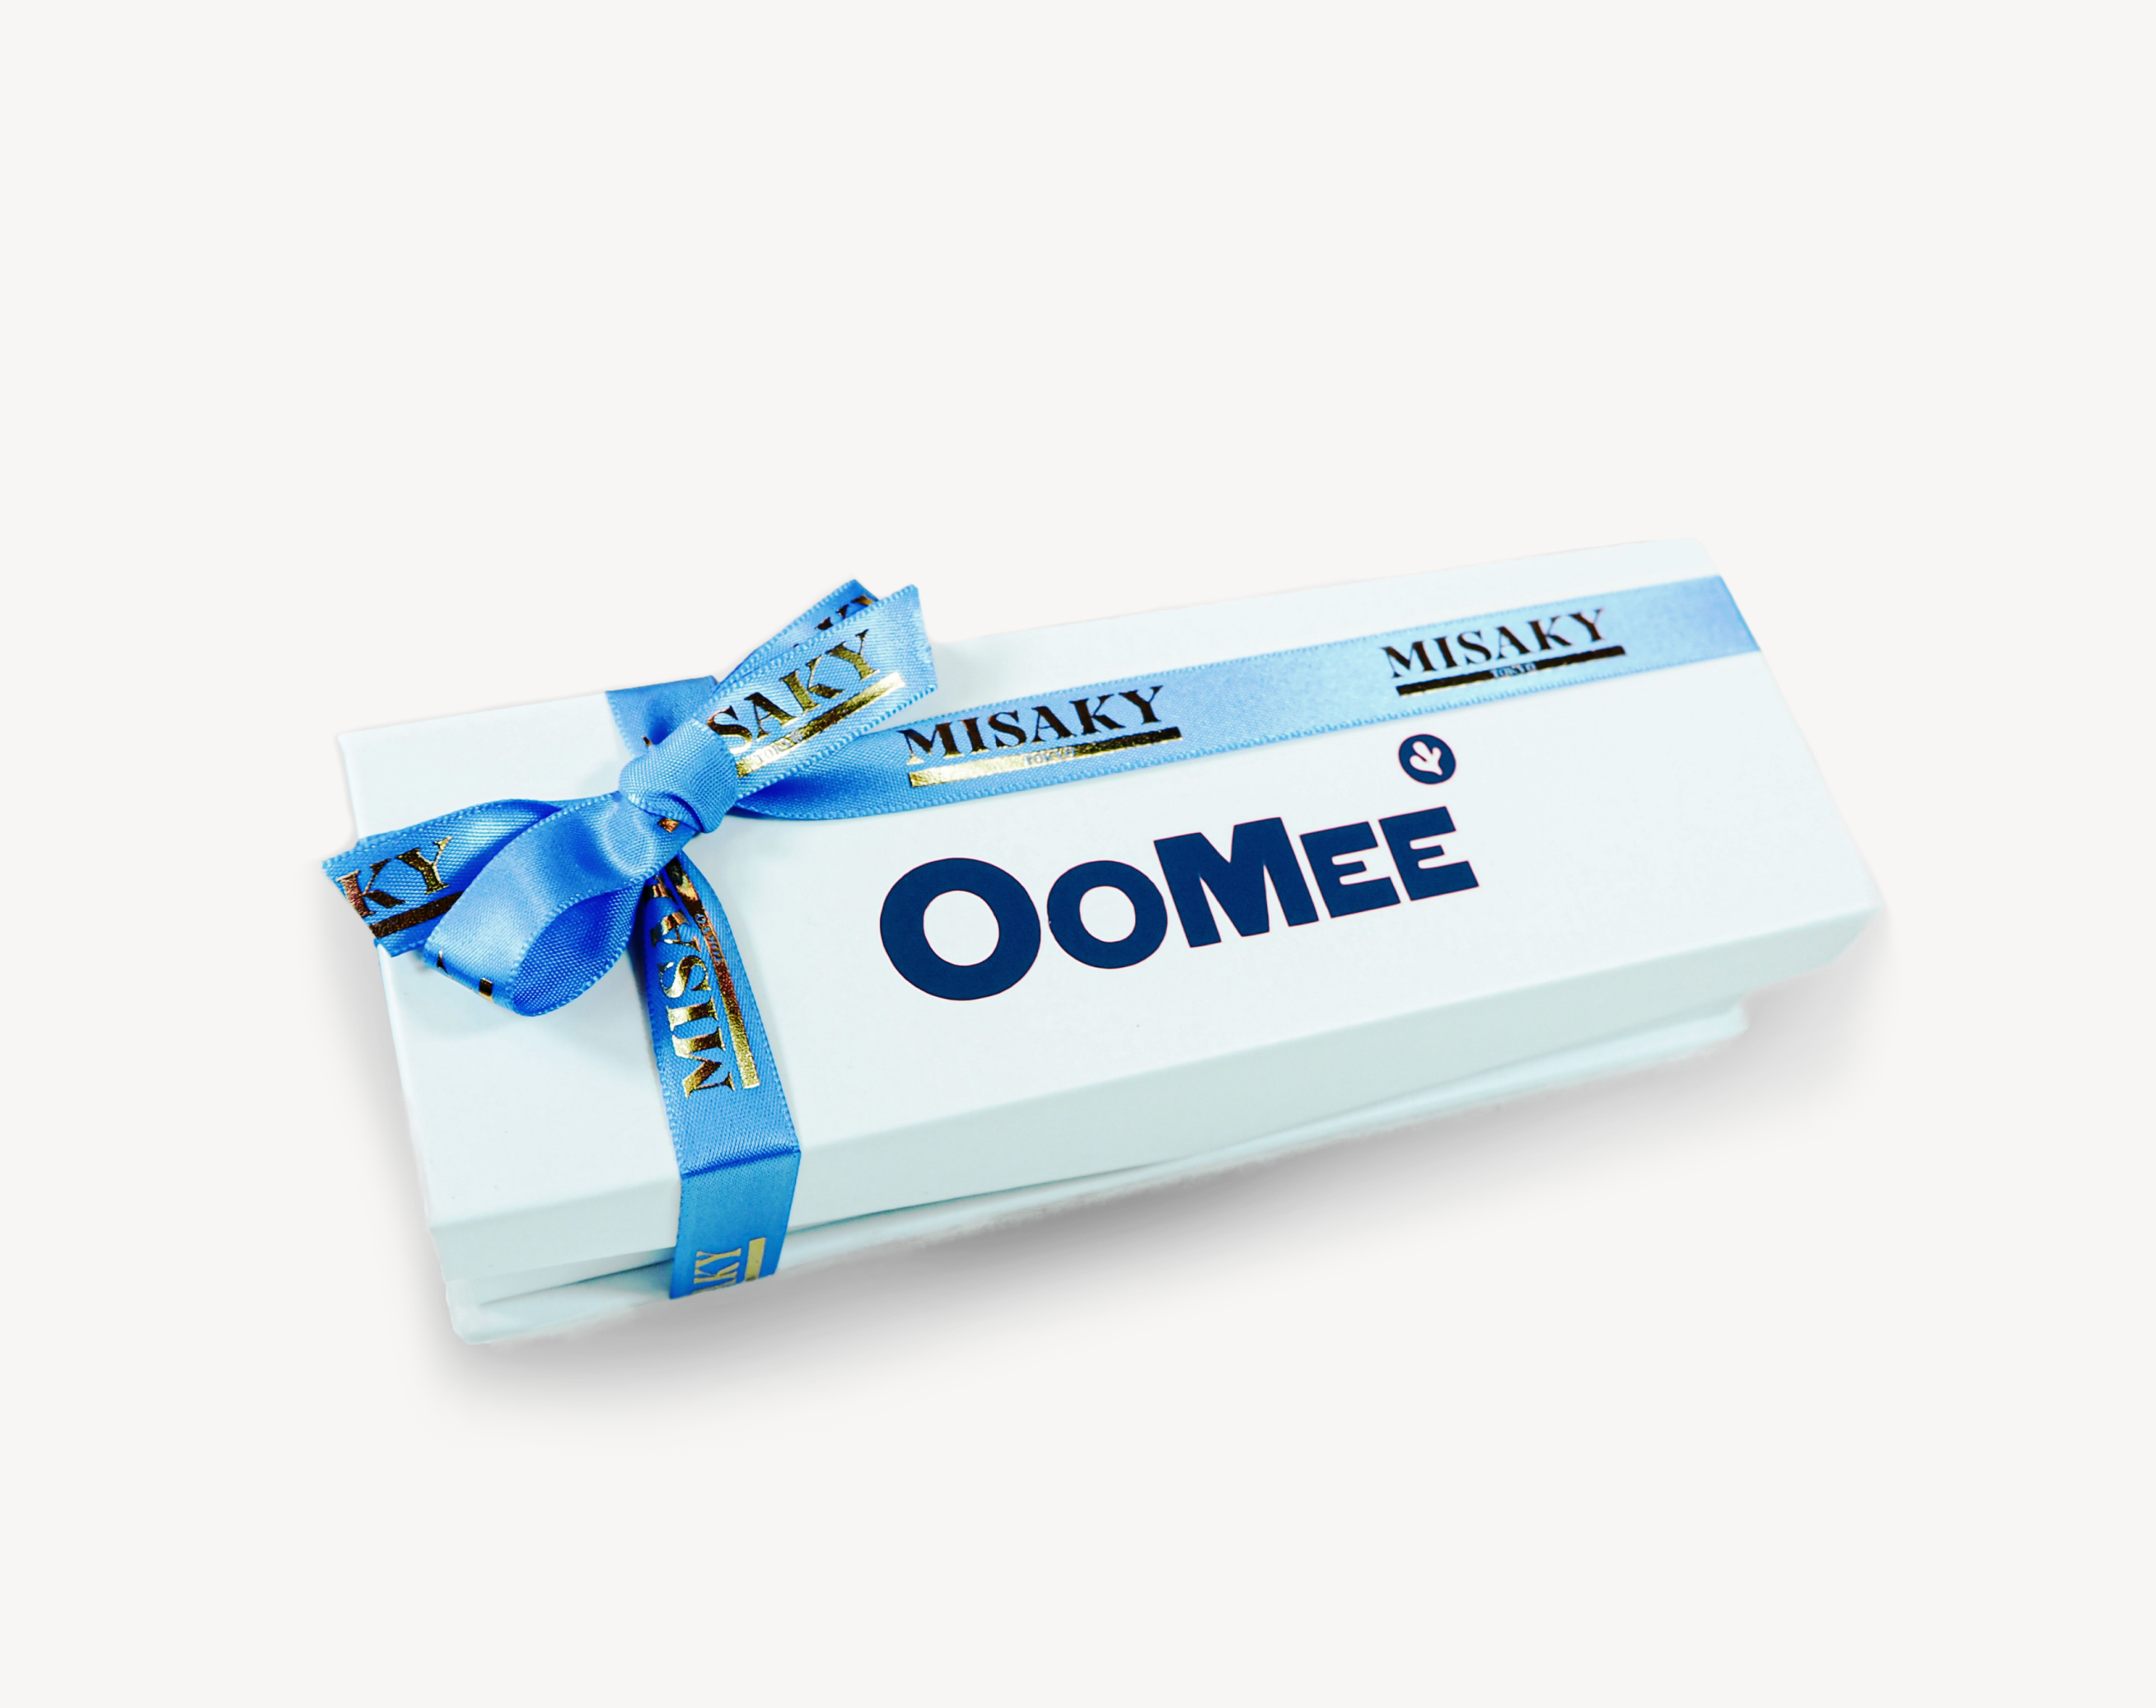 A white gift box with the word 'OOMEE' in large blue letters, tied with a blue satin ribbon printed with 'MISAKY' in gold, set against a white background.